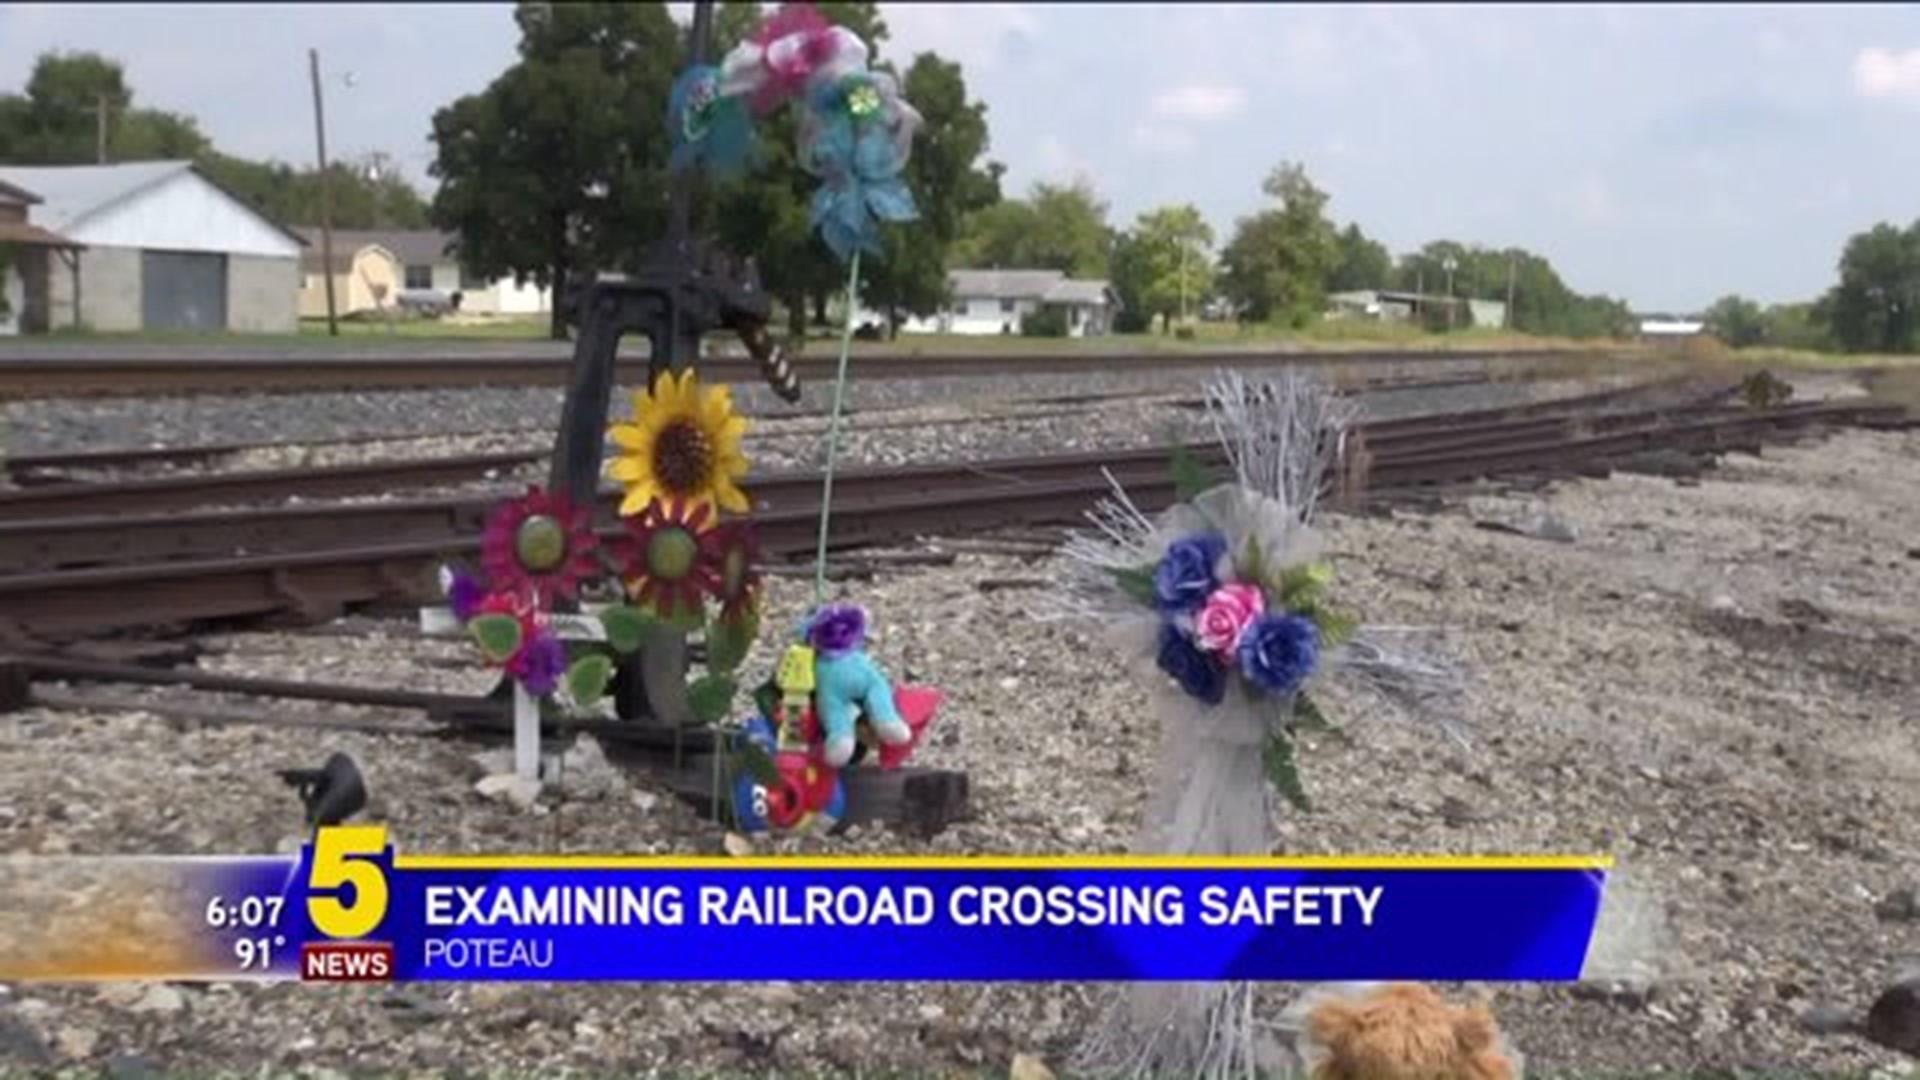 Okla. Transportation Dept. To Look At Railroad Crossing Safety Following Deadly Crash